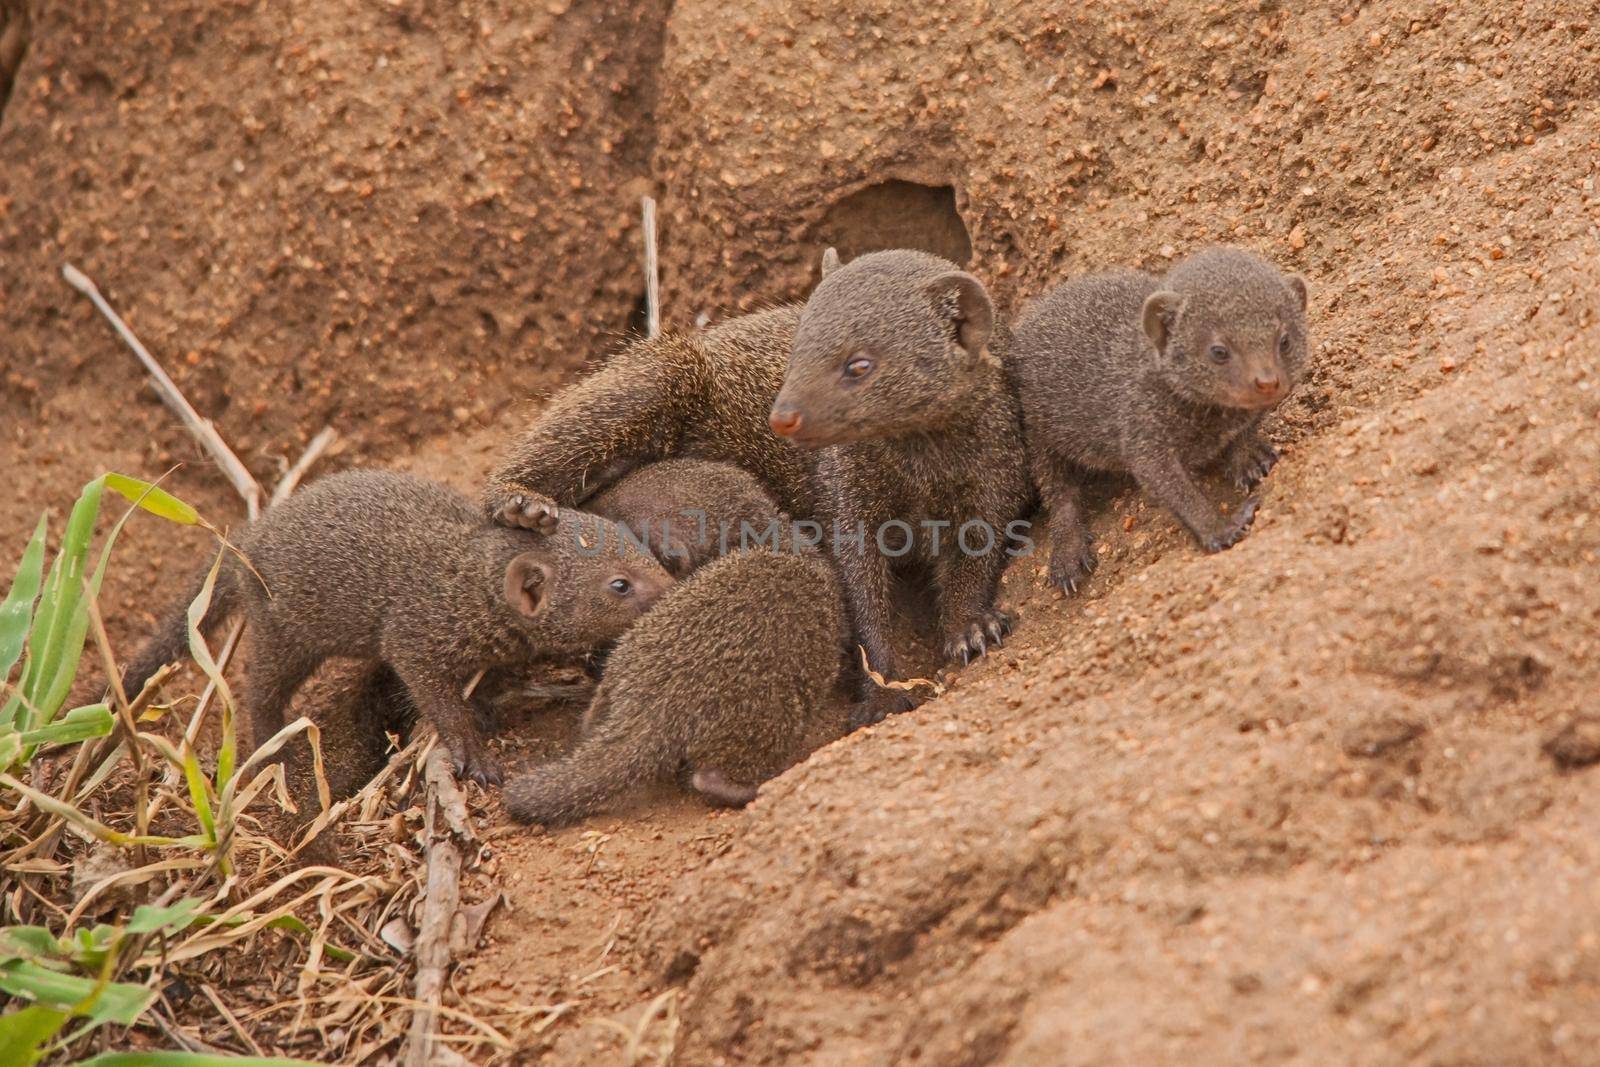 Dwarf Mongoose (Helogale parvula) mother with babies on an abandoned anthill in Kruger National Park. South Africa